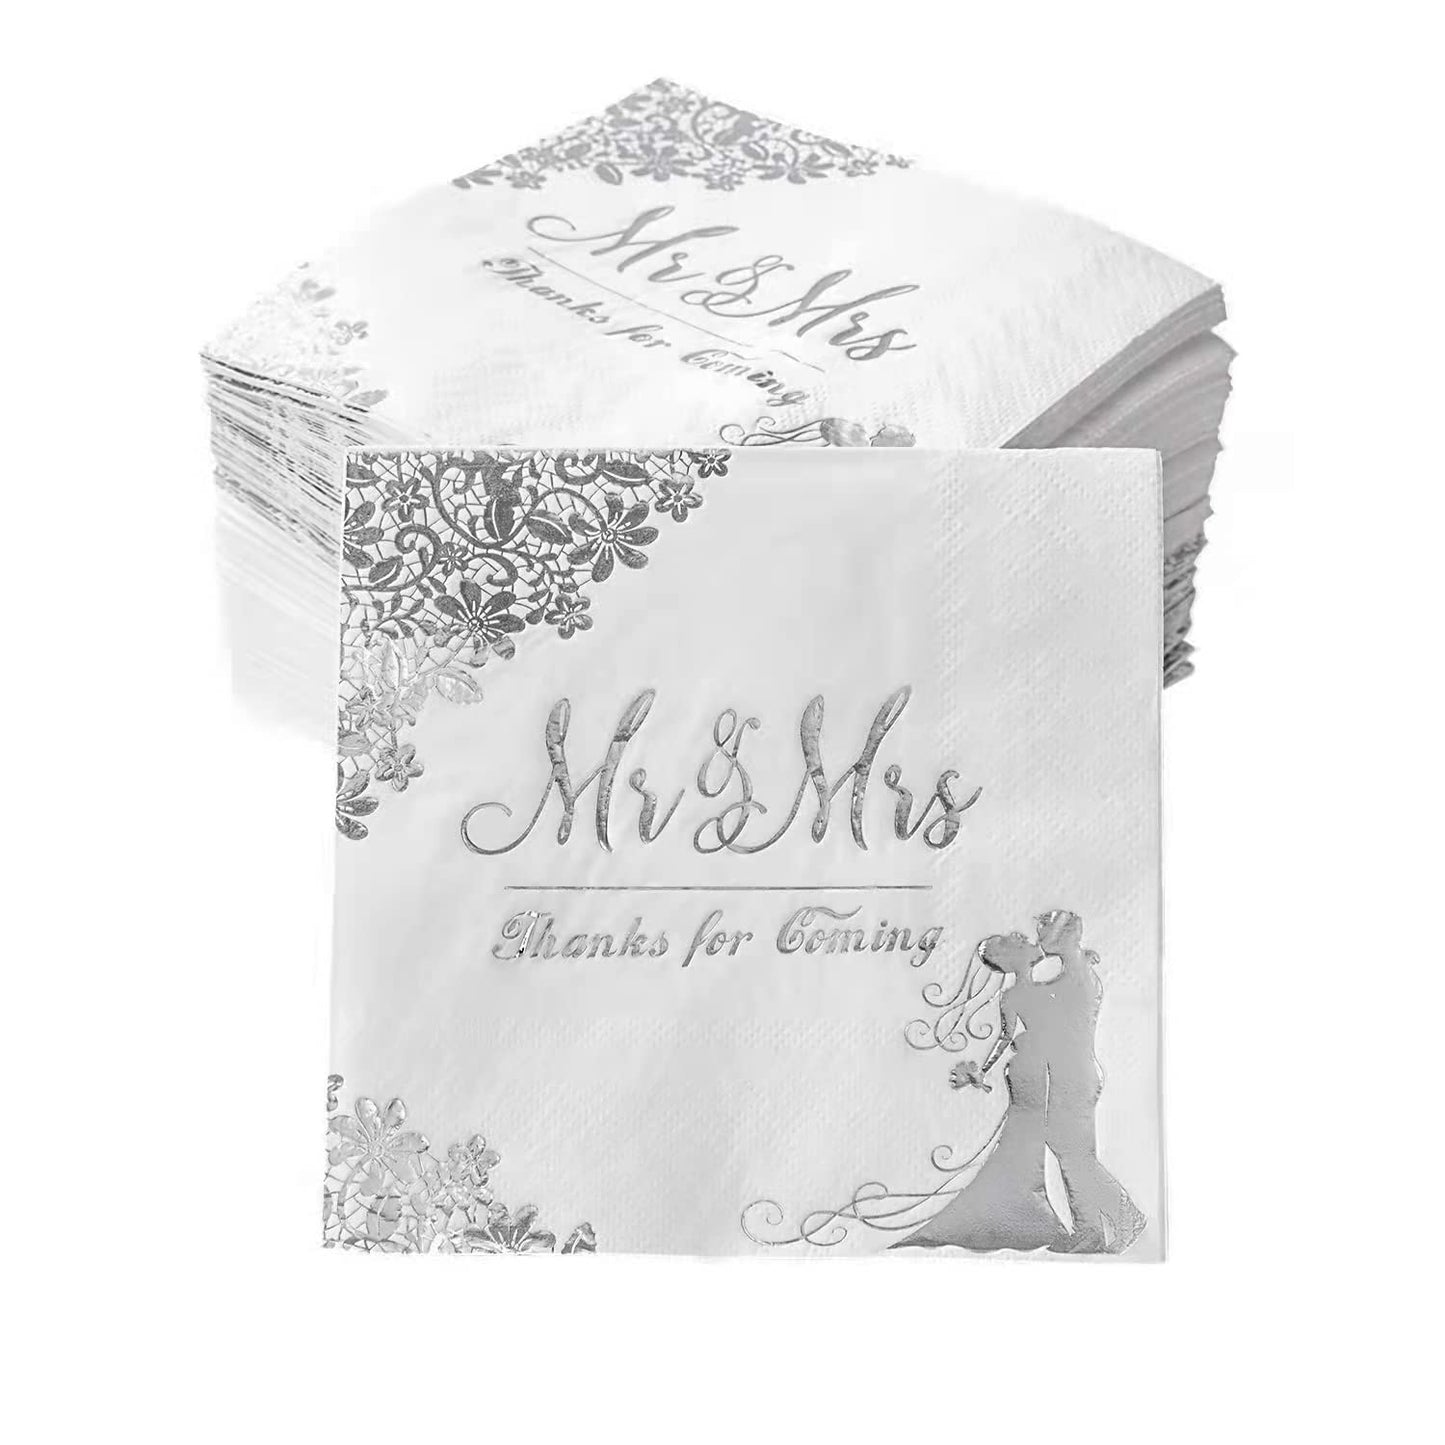 White and silver table napkins